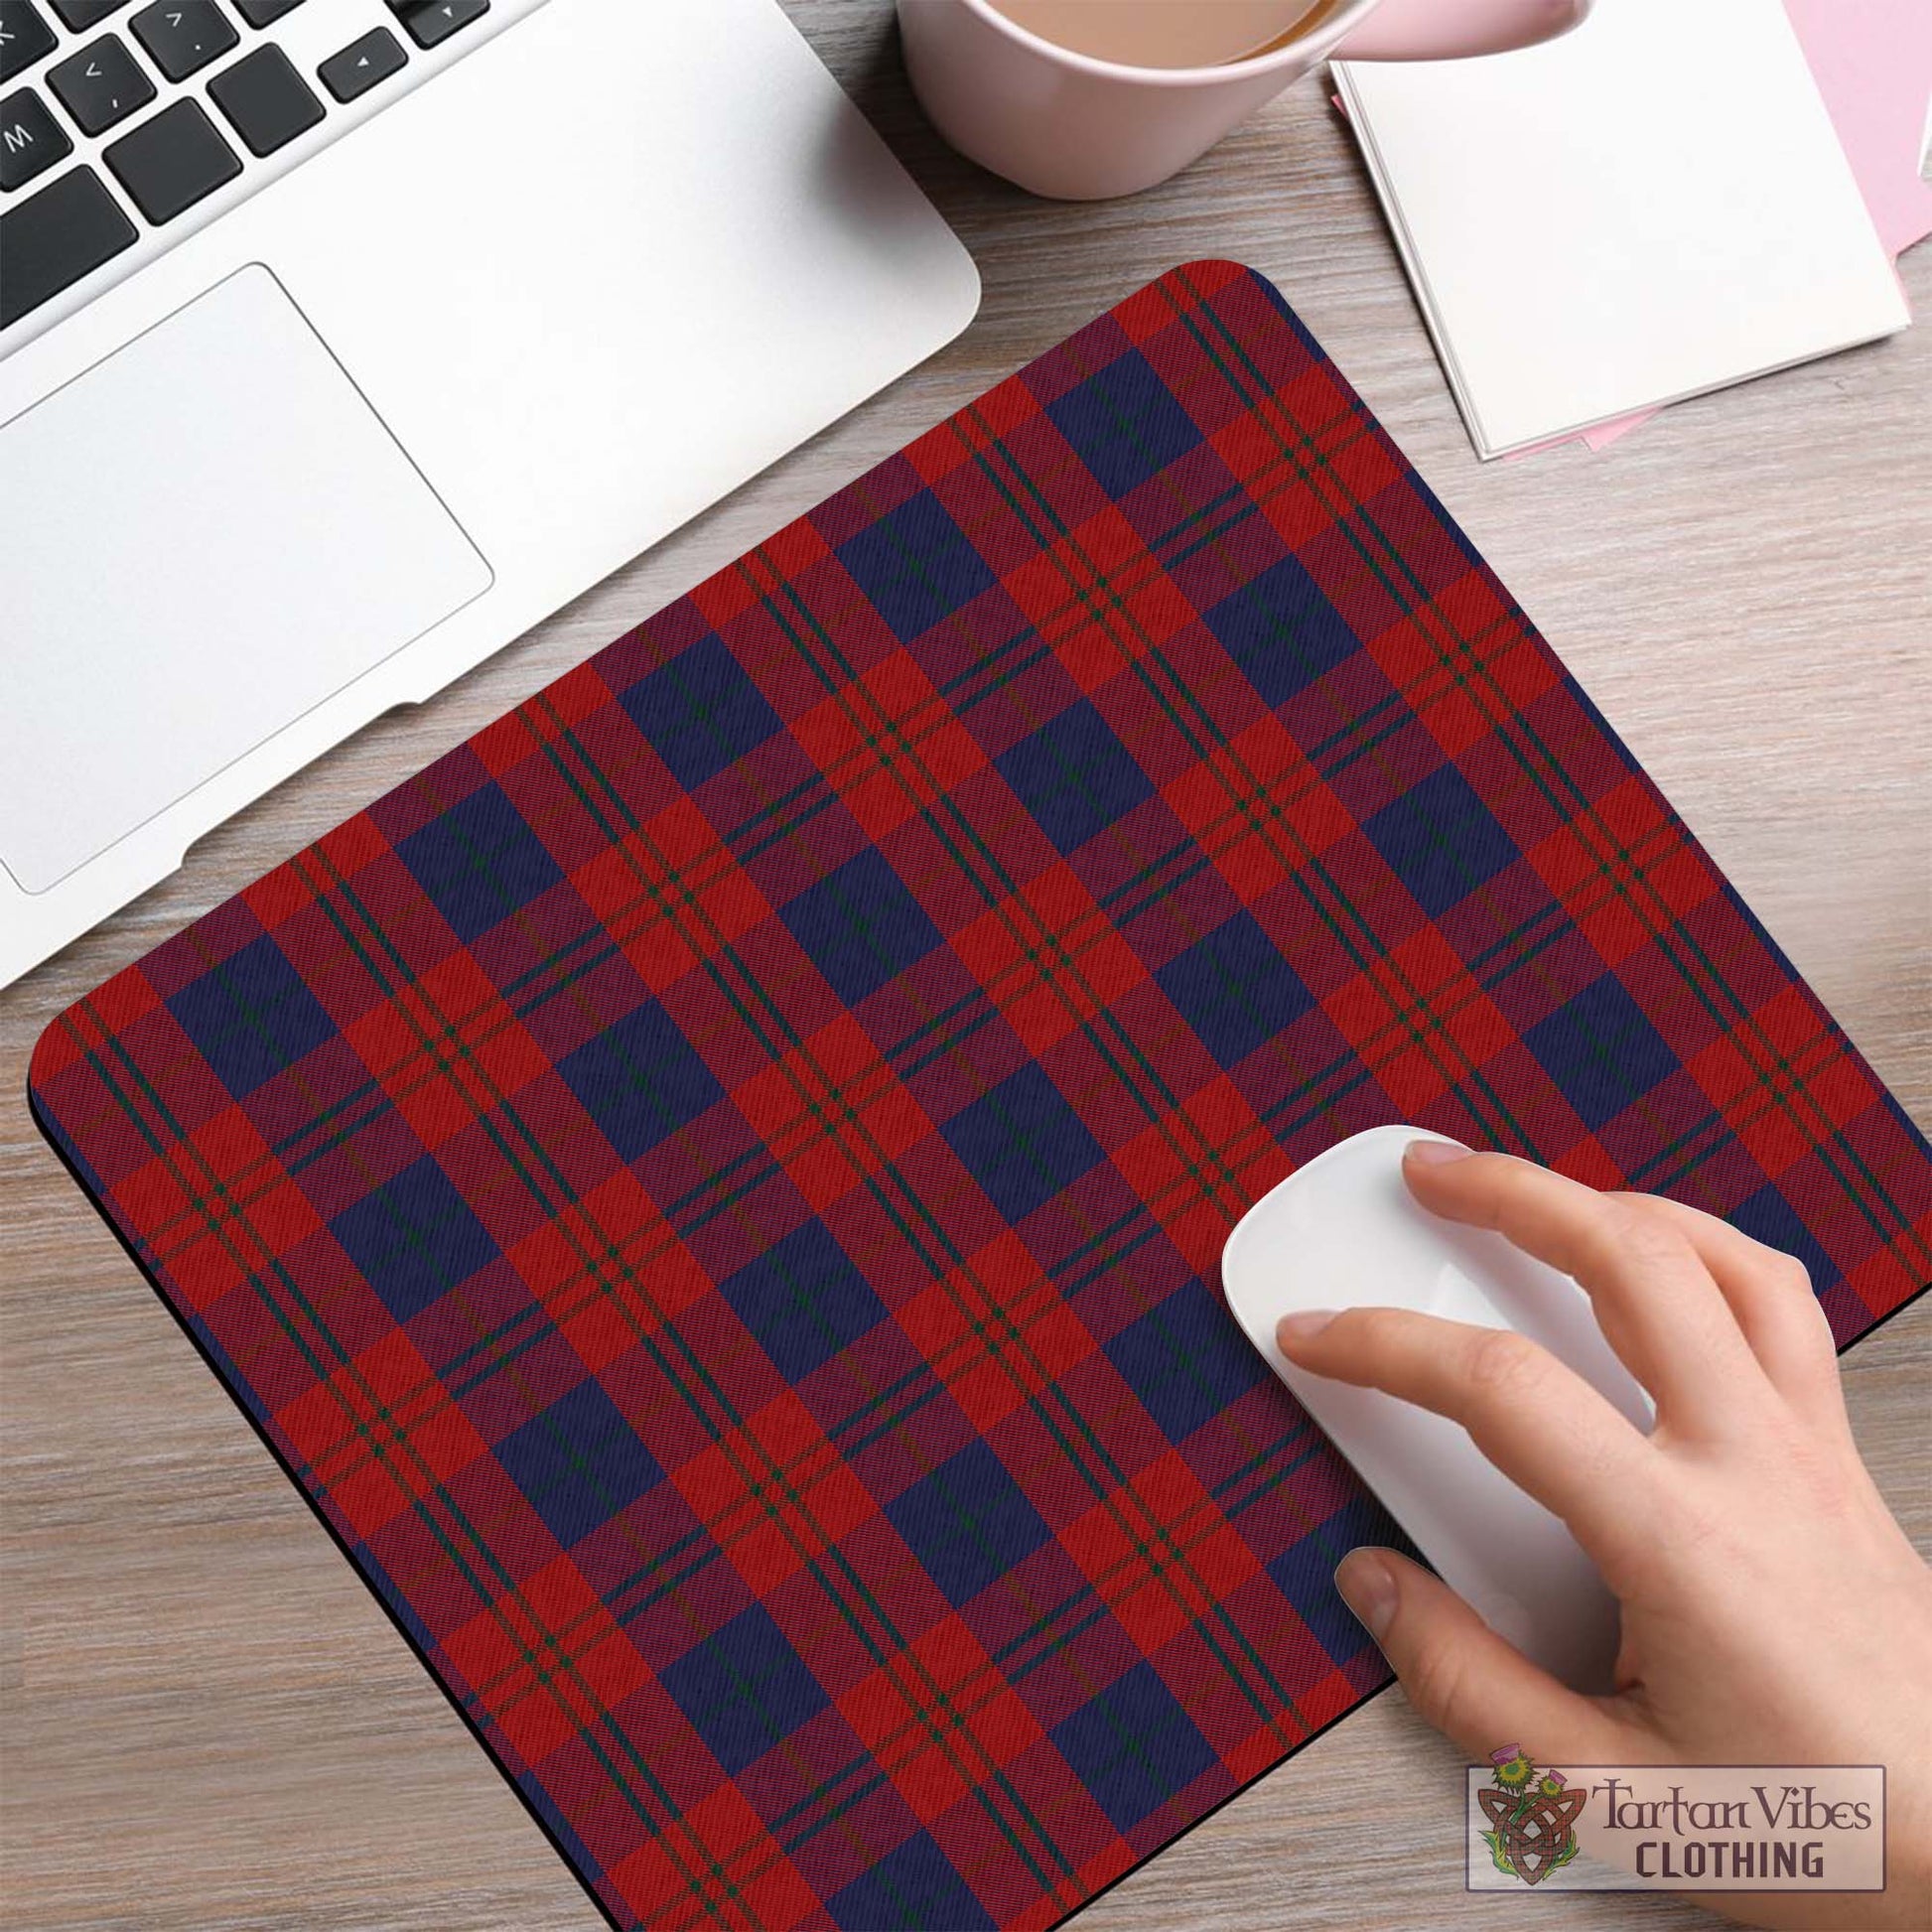 Tartan Vibes Clothing Wotherspoon Tartan Mouse Pad